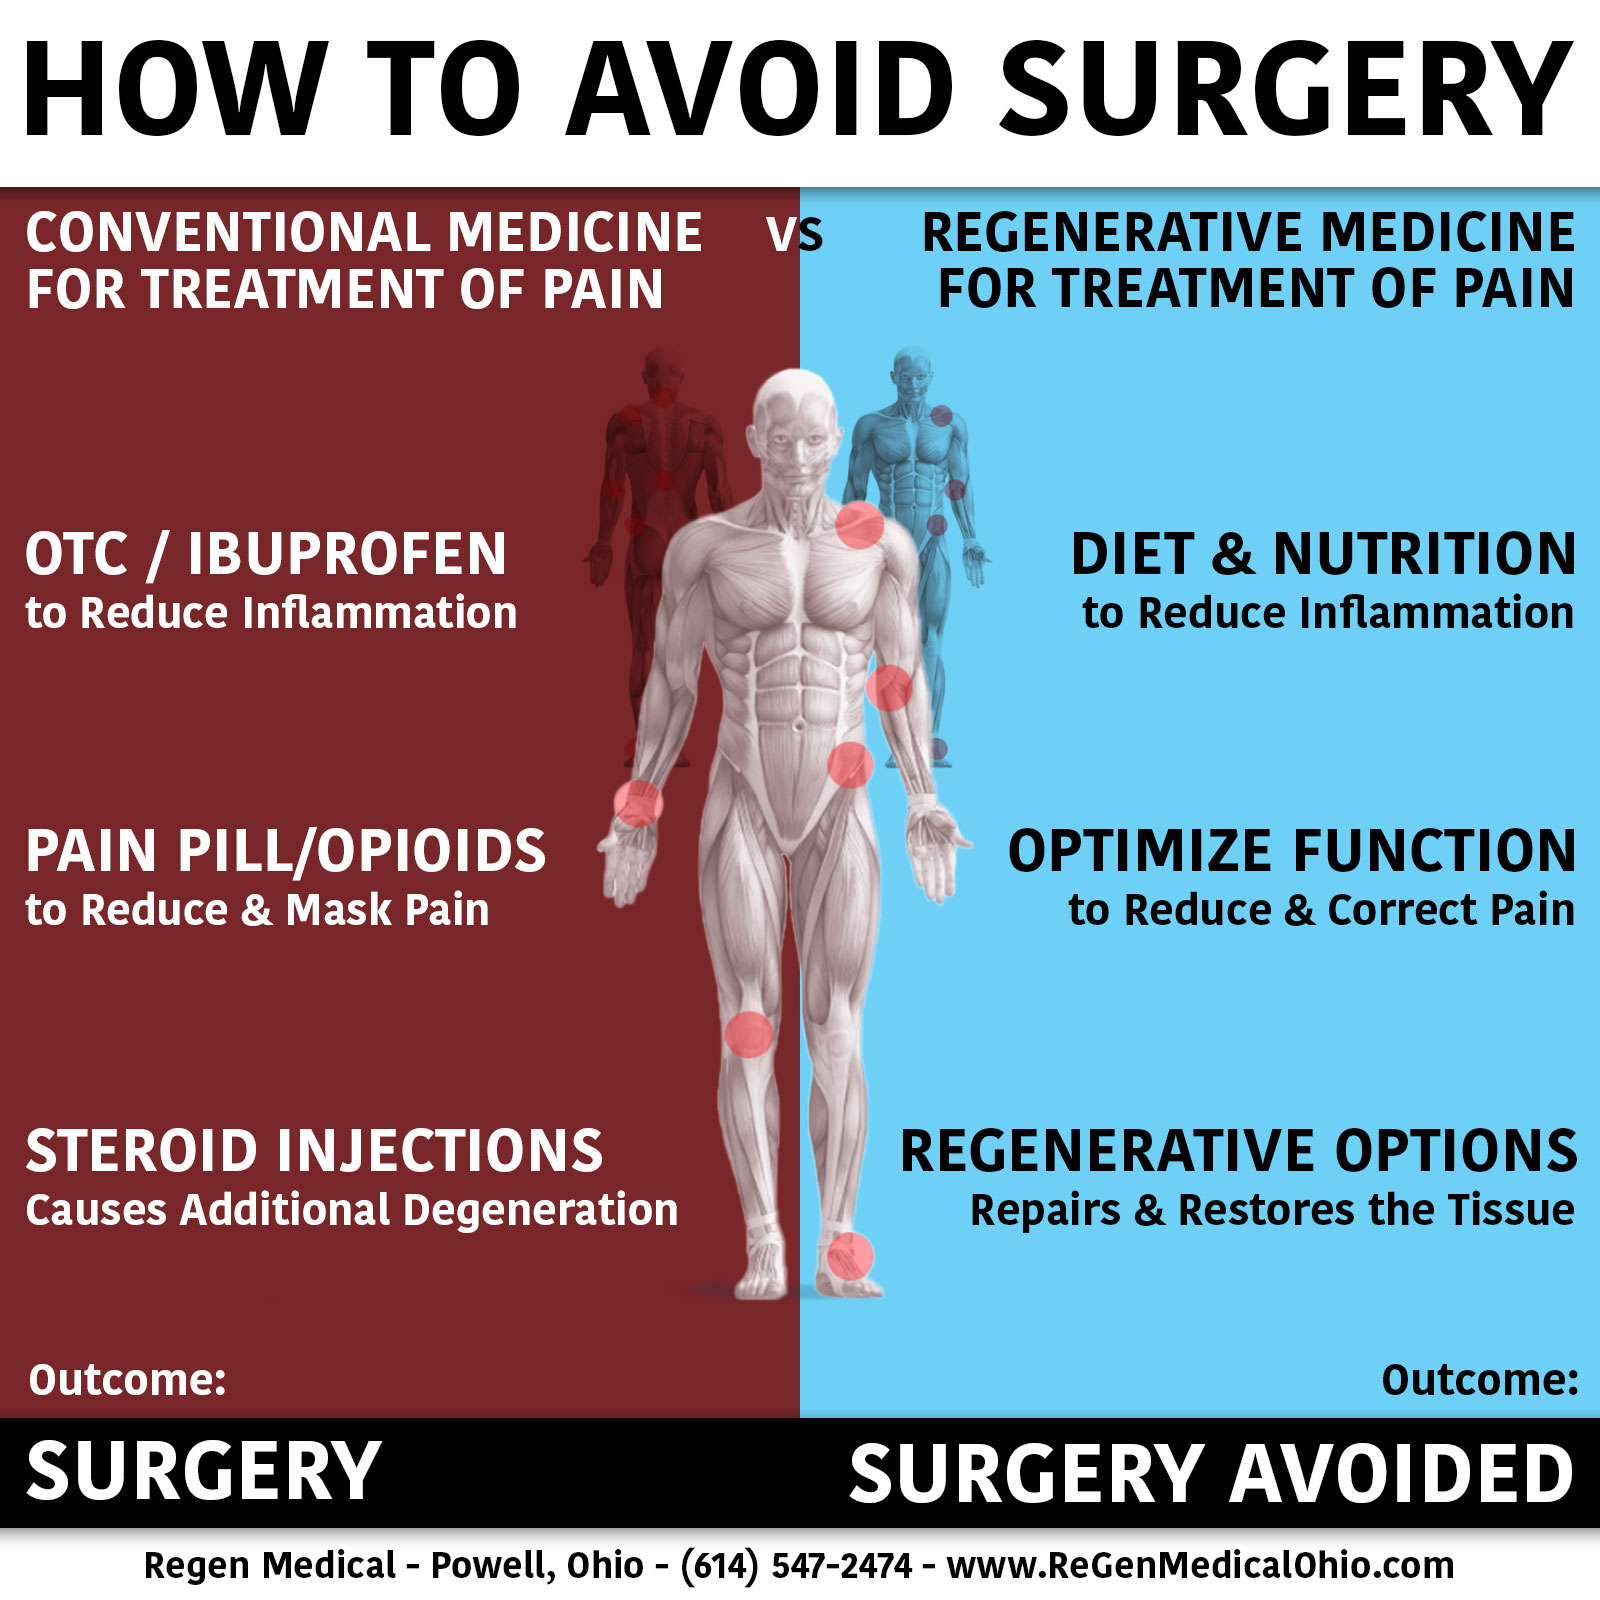 How to avoid surgery infographic